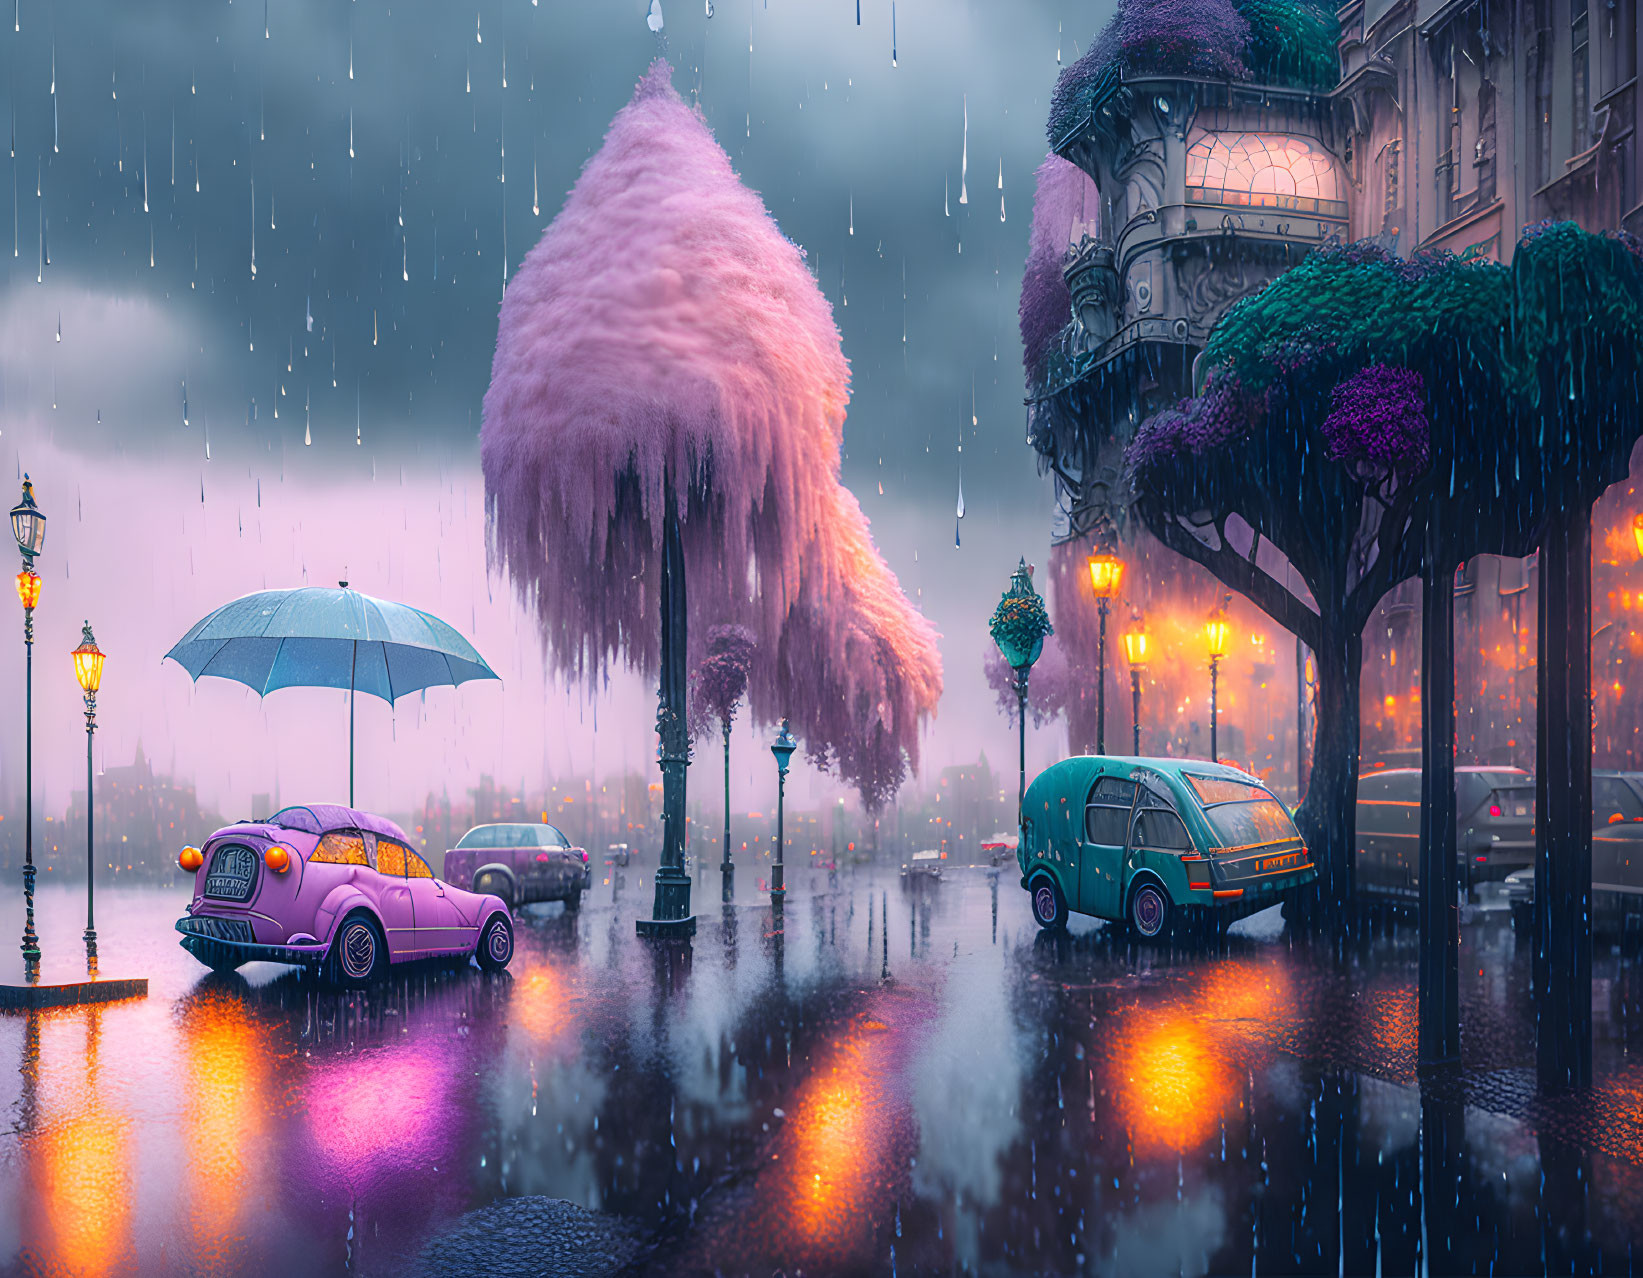 Colorful Trees and Vintage Car in Rainy City Street Scene